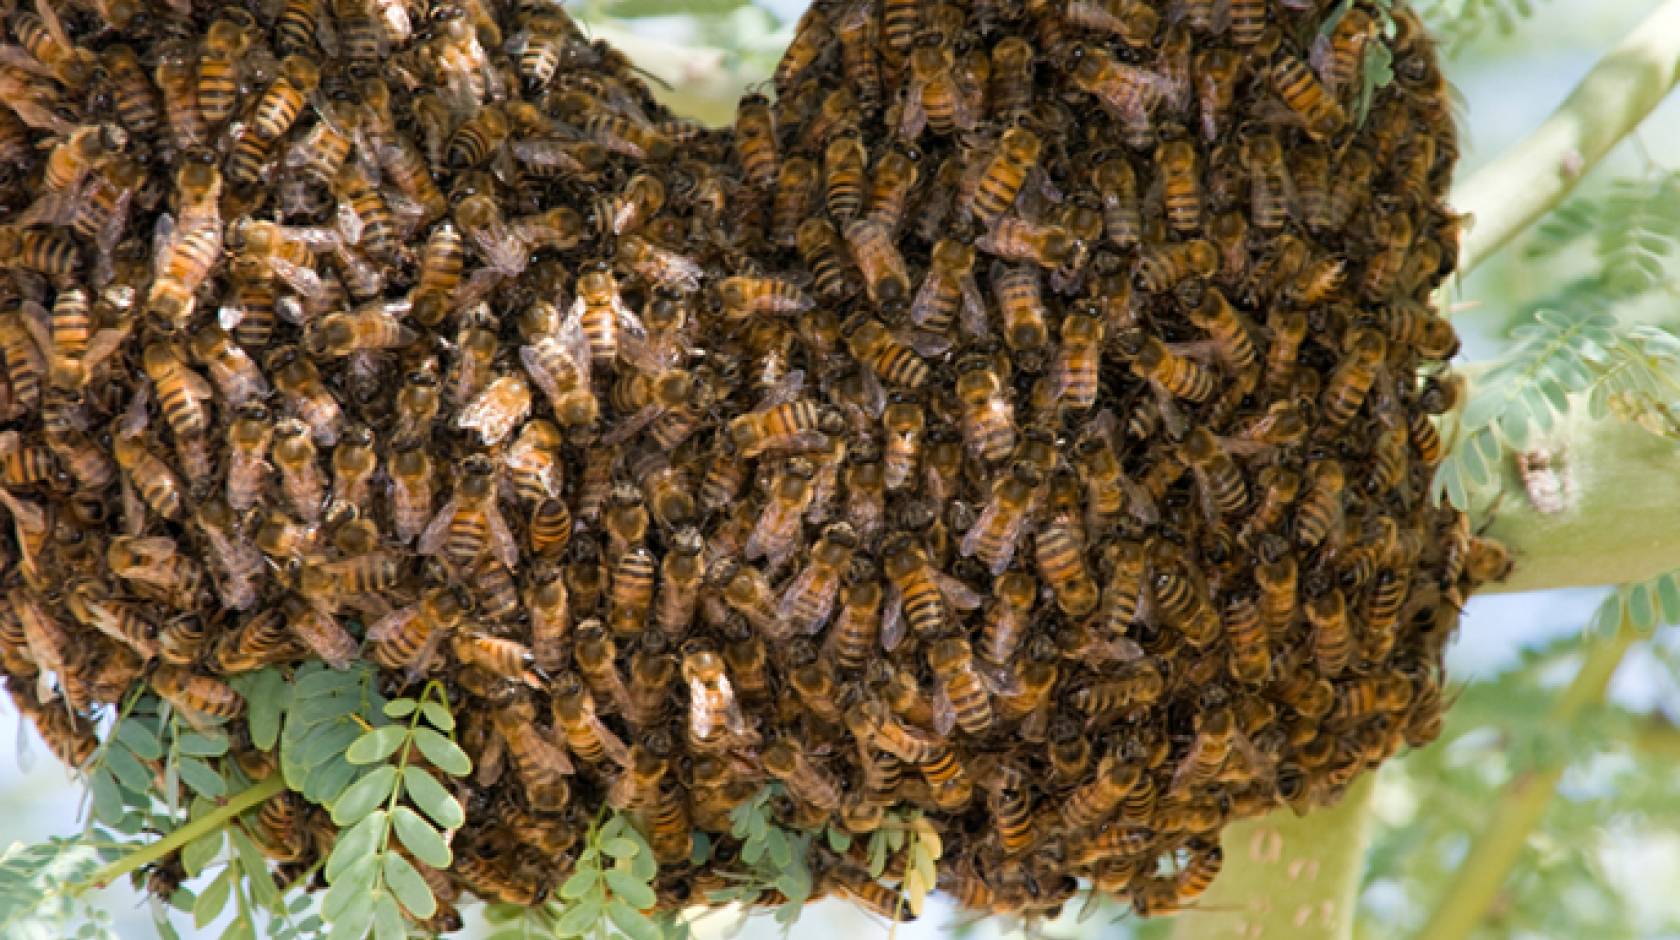 A desert hive of Africanized honey bees.